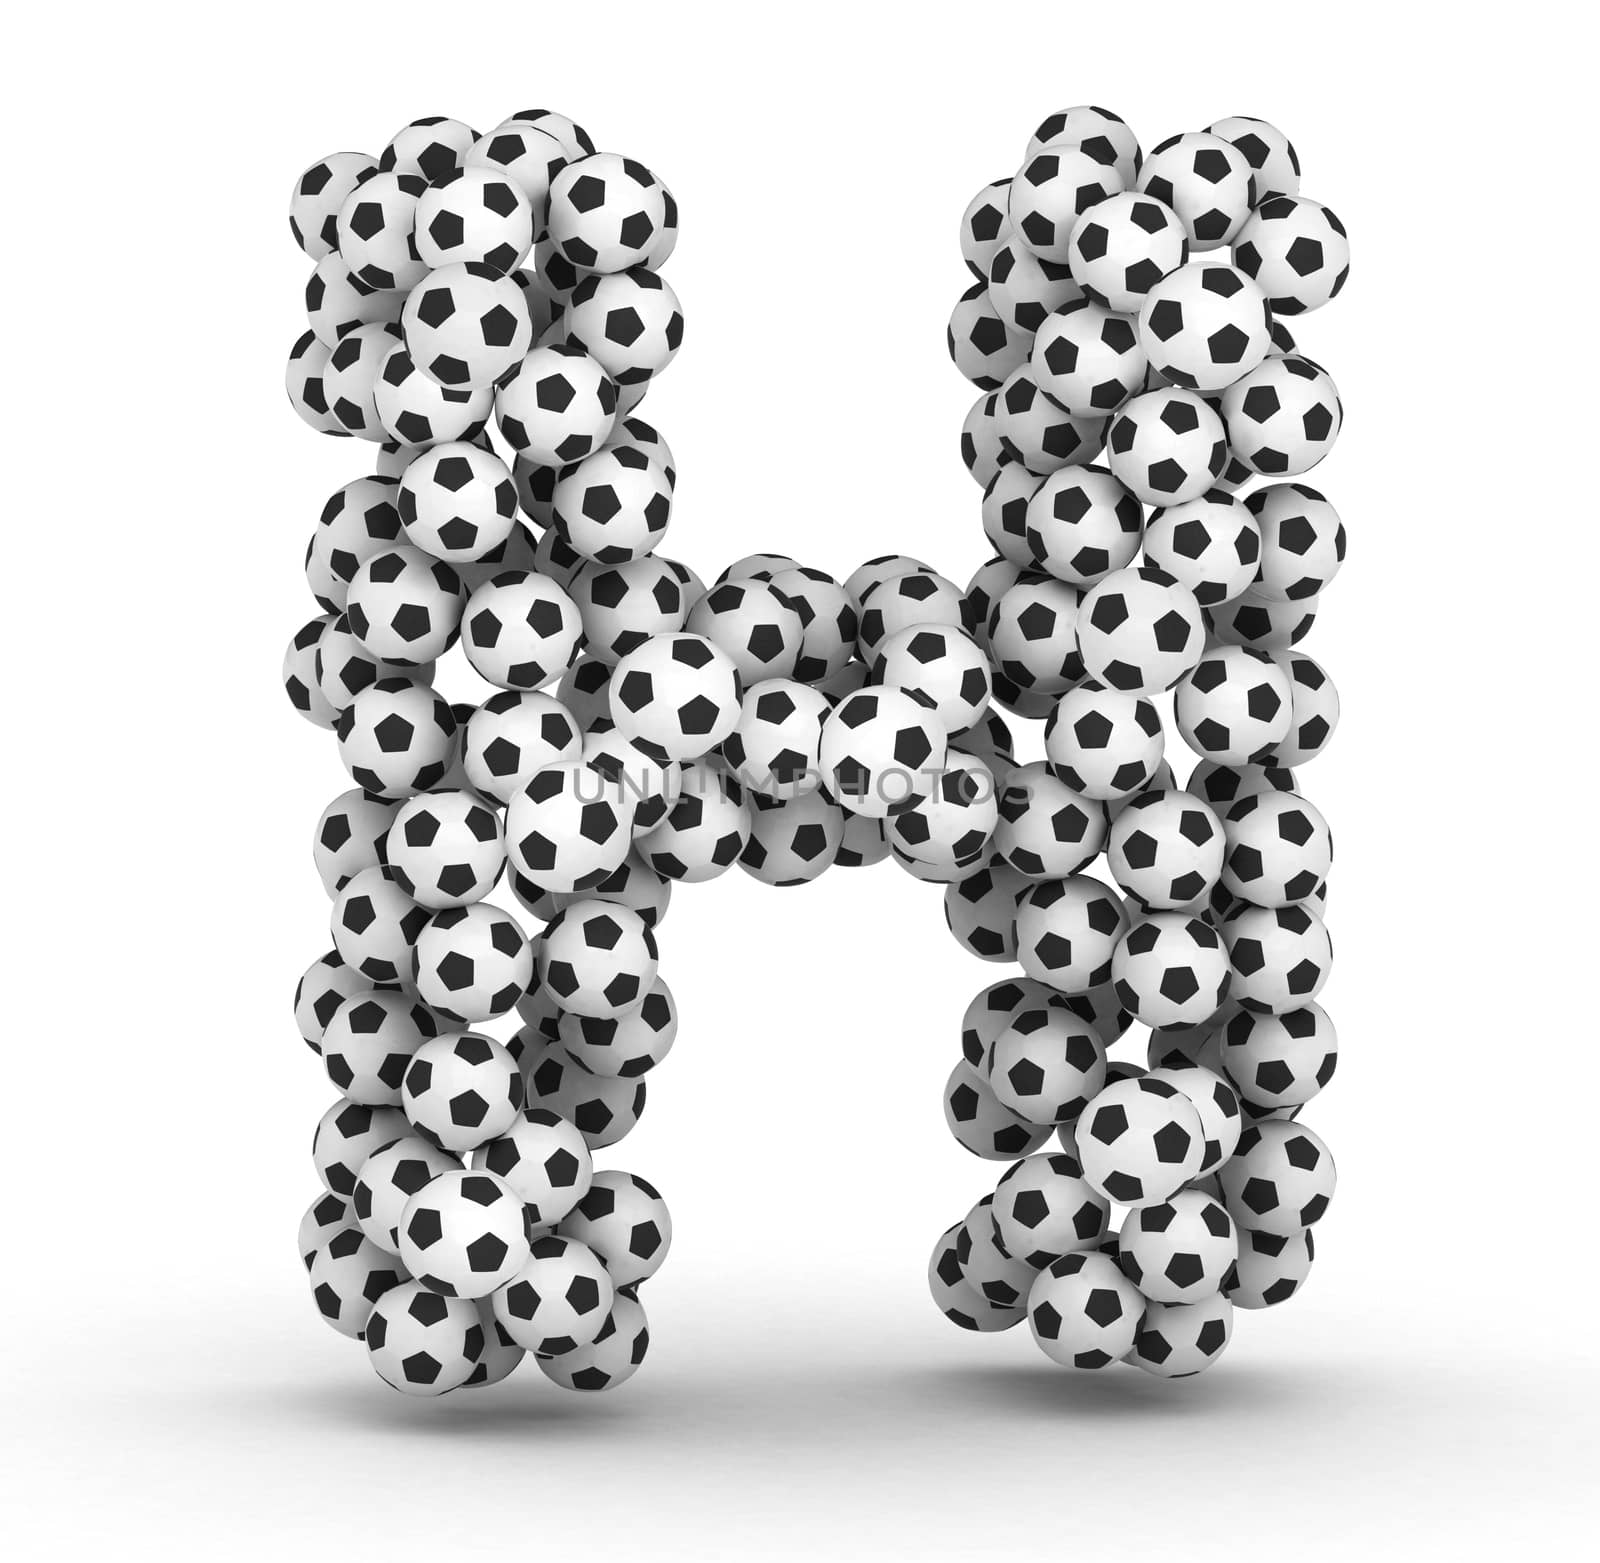 Letter H from soccer football balls by iunewind